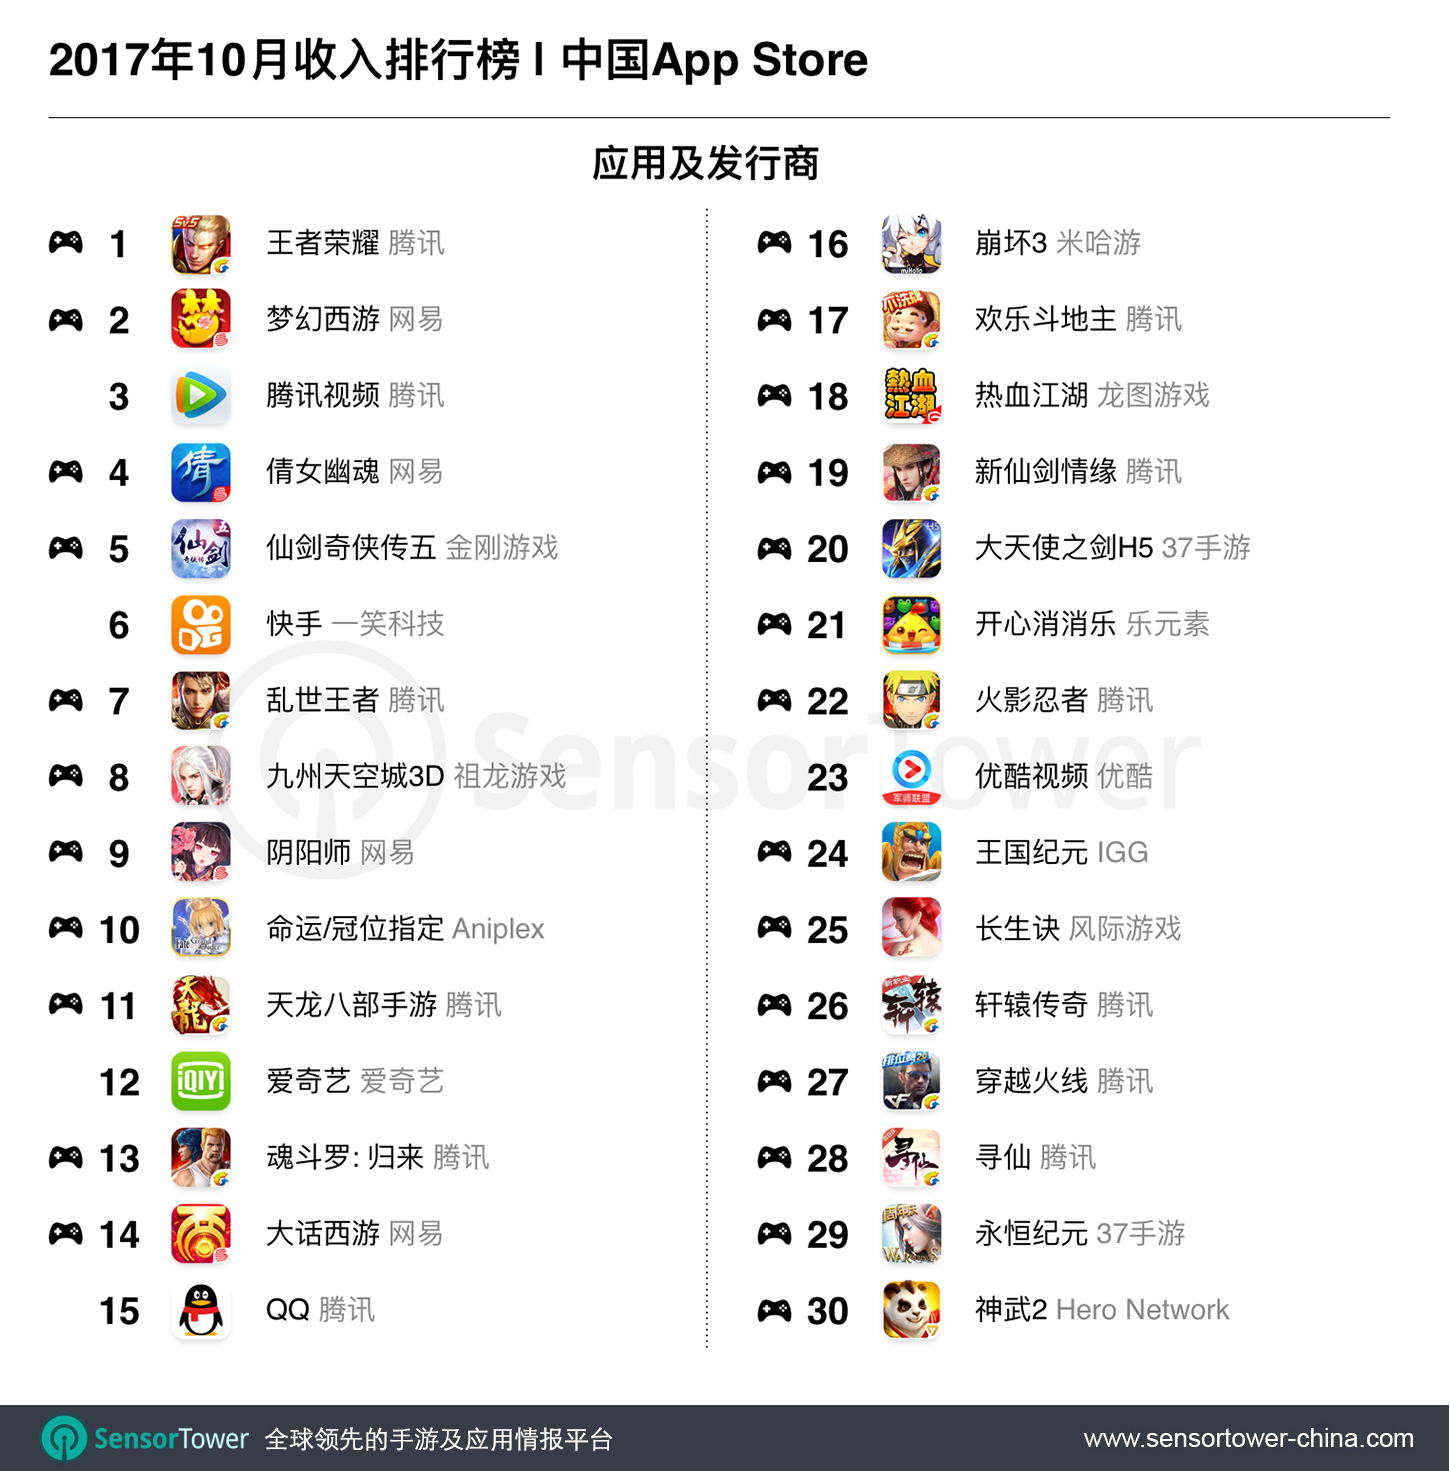 October 2017 Top 30 Apps by iOS Revenue in China